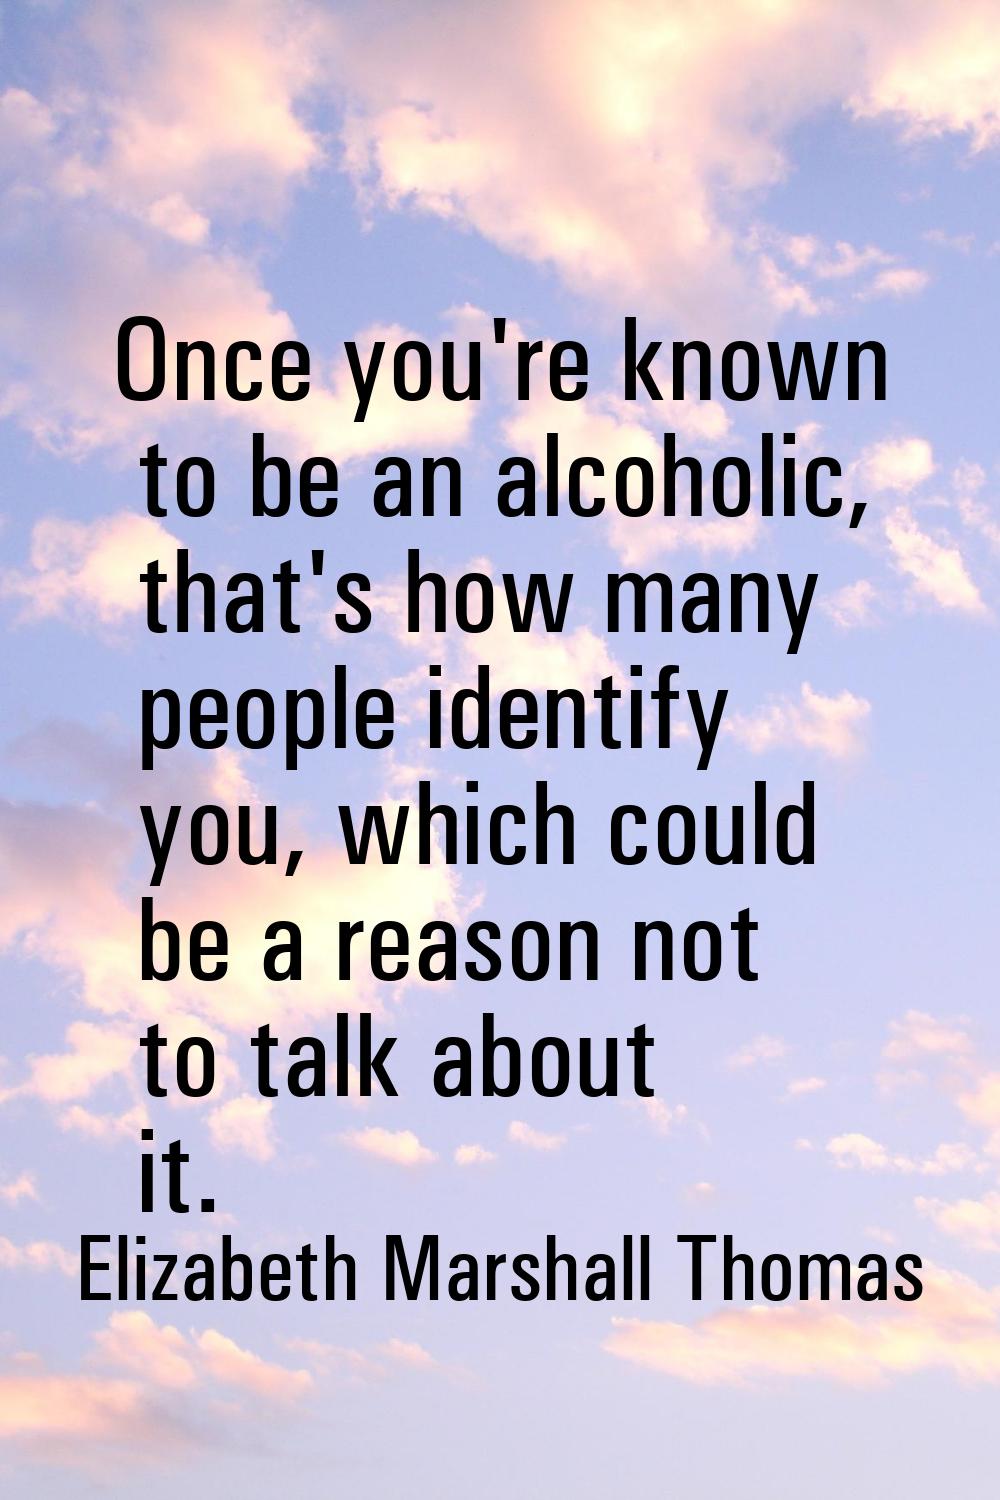 Once you're known to be an alcoholic, that's how many people identify you, which could be a reason 